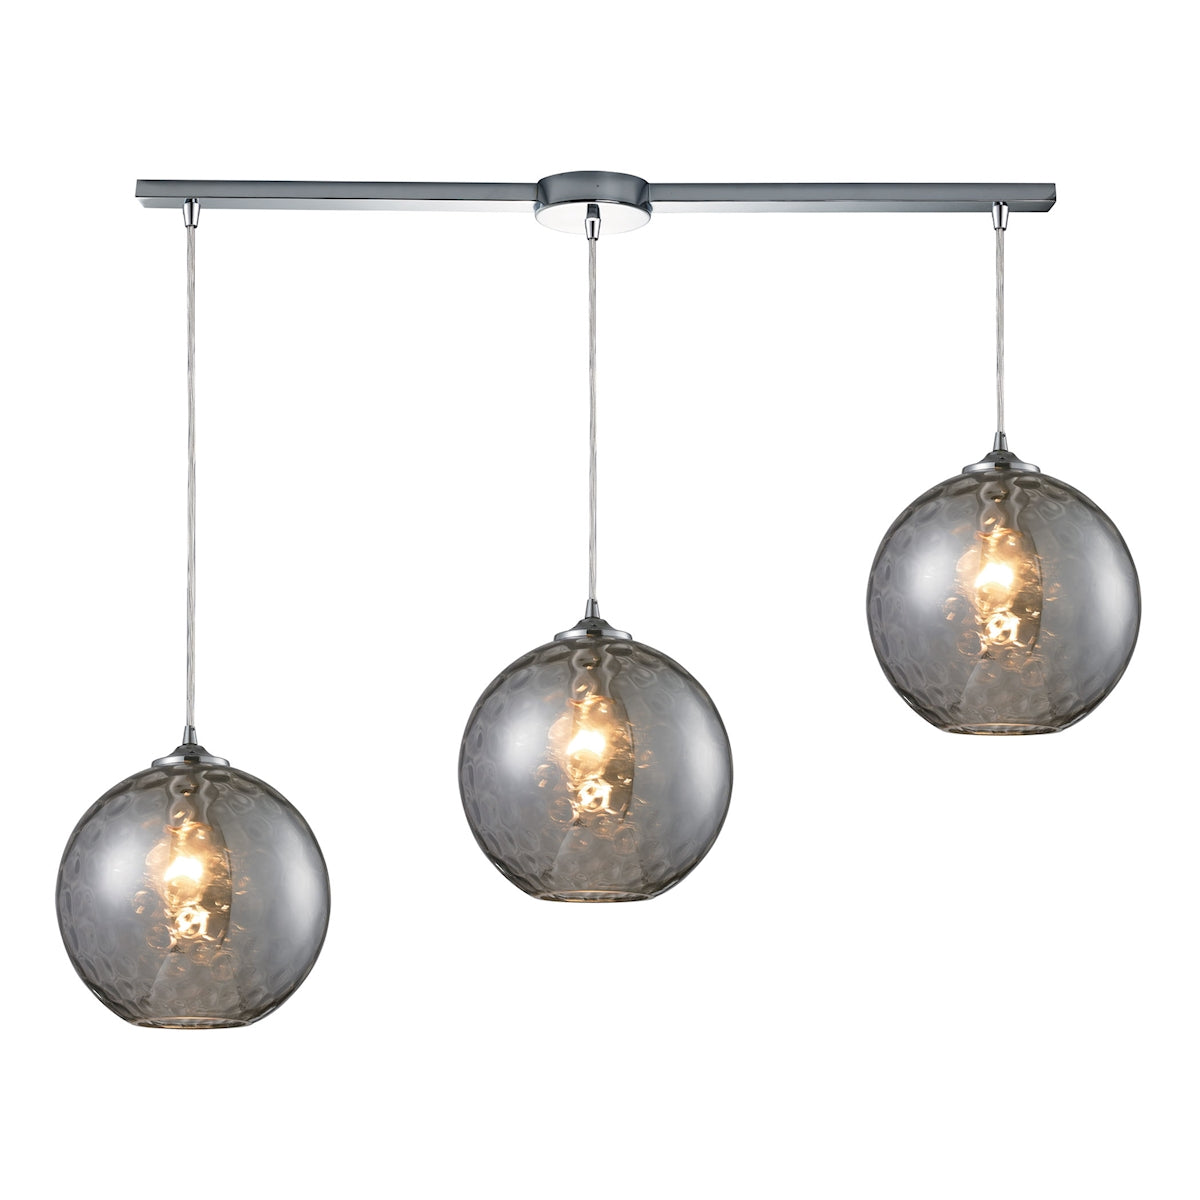 ELK Lighting 31380/3L-SMK Watersphere 3-Light Linear Pendant Fixture in Chrome with Hammered Smoke Glass